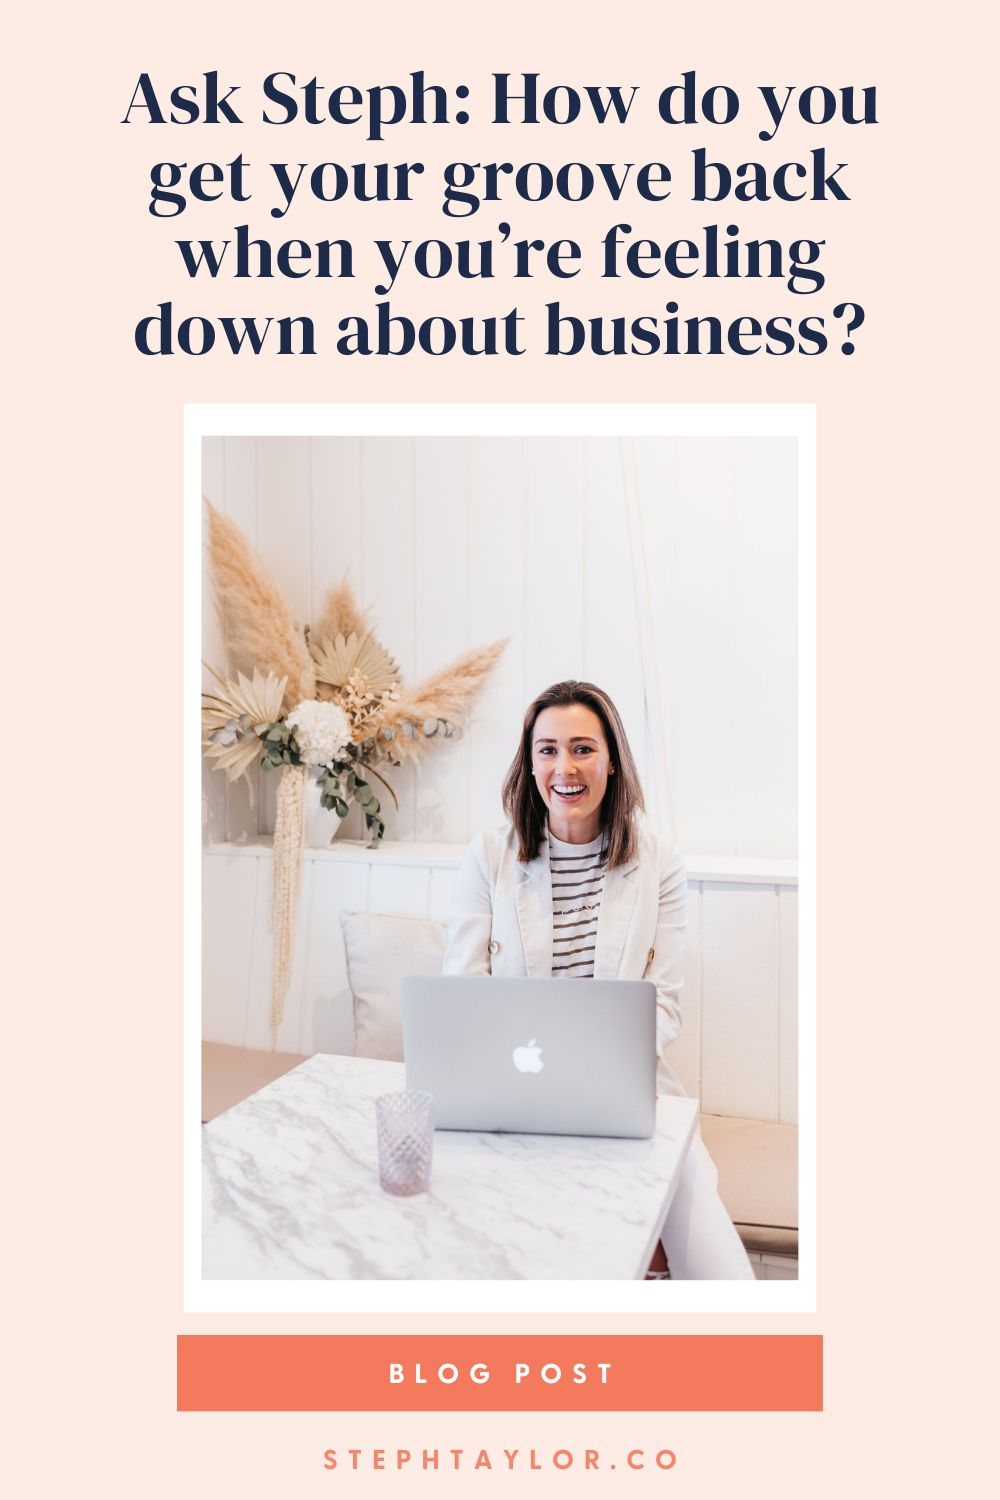 Ask Steph: How do you get your groove back when you’re feeling down about business?